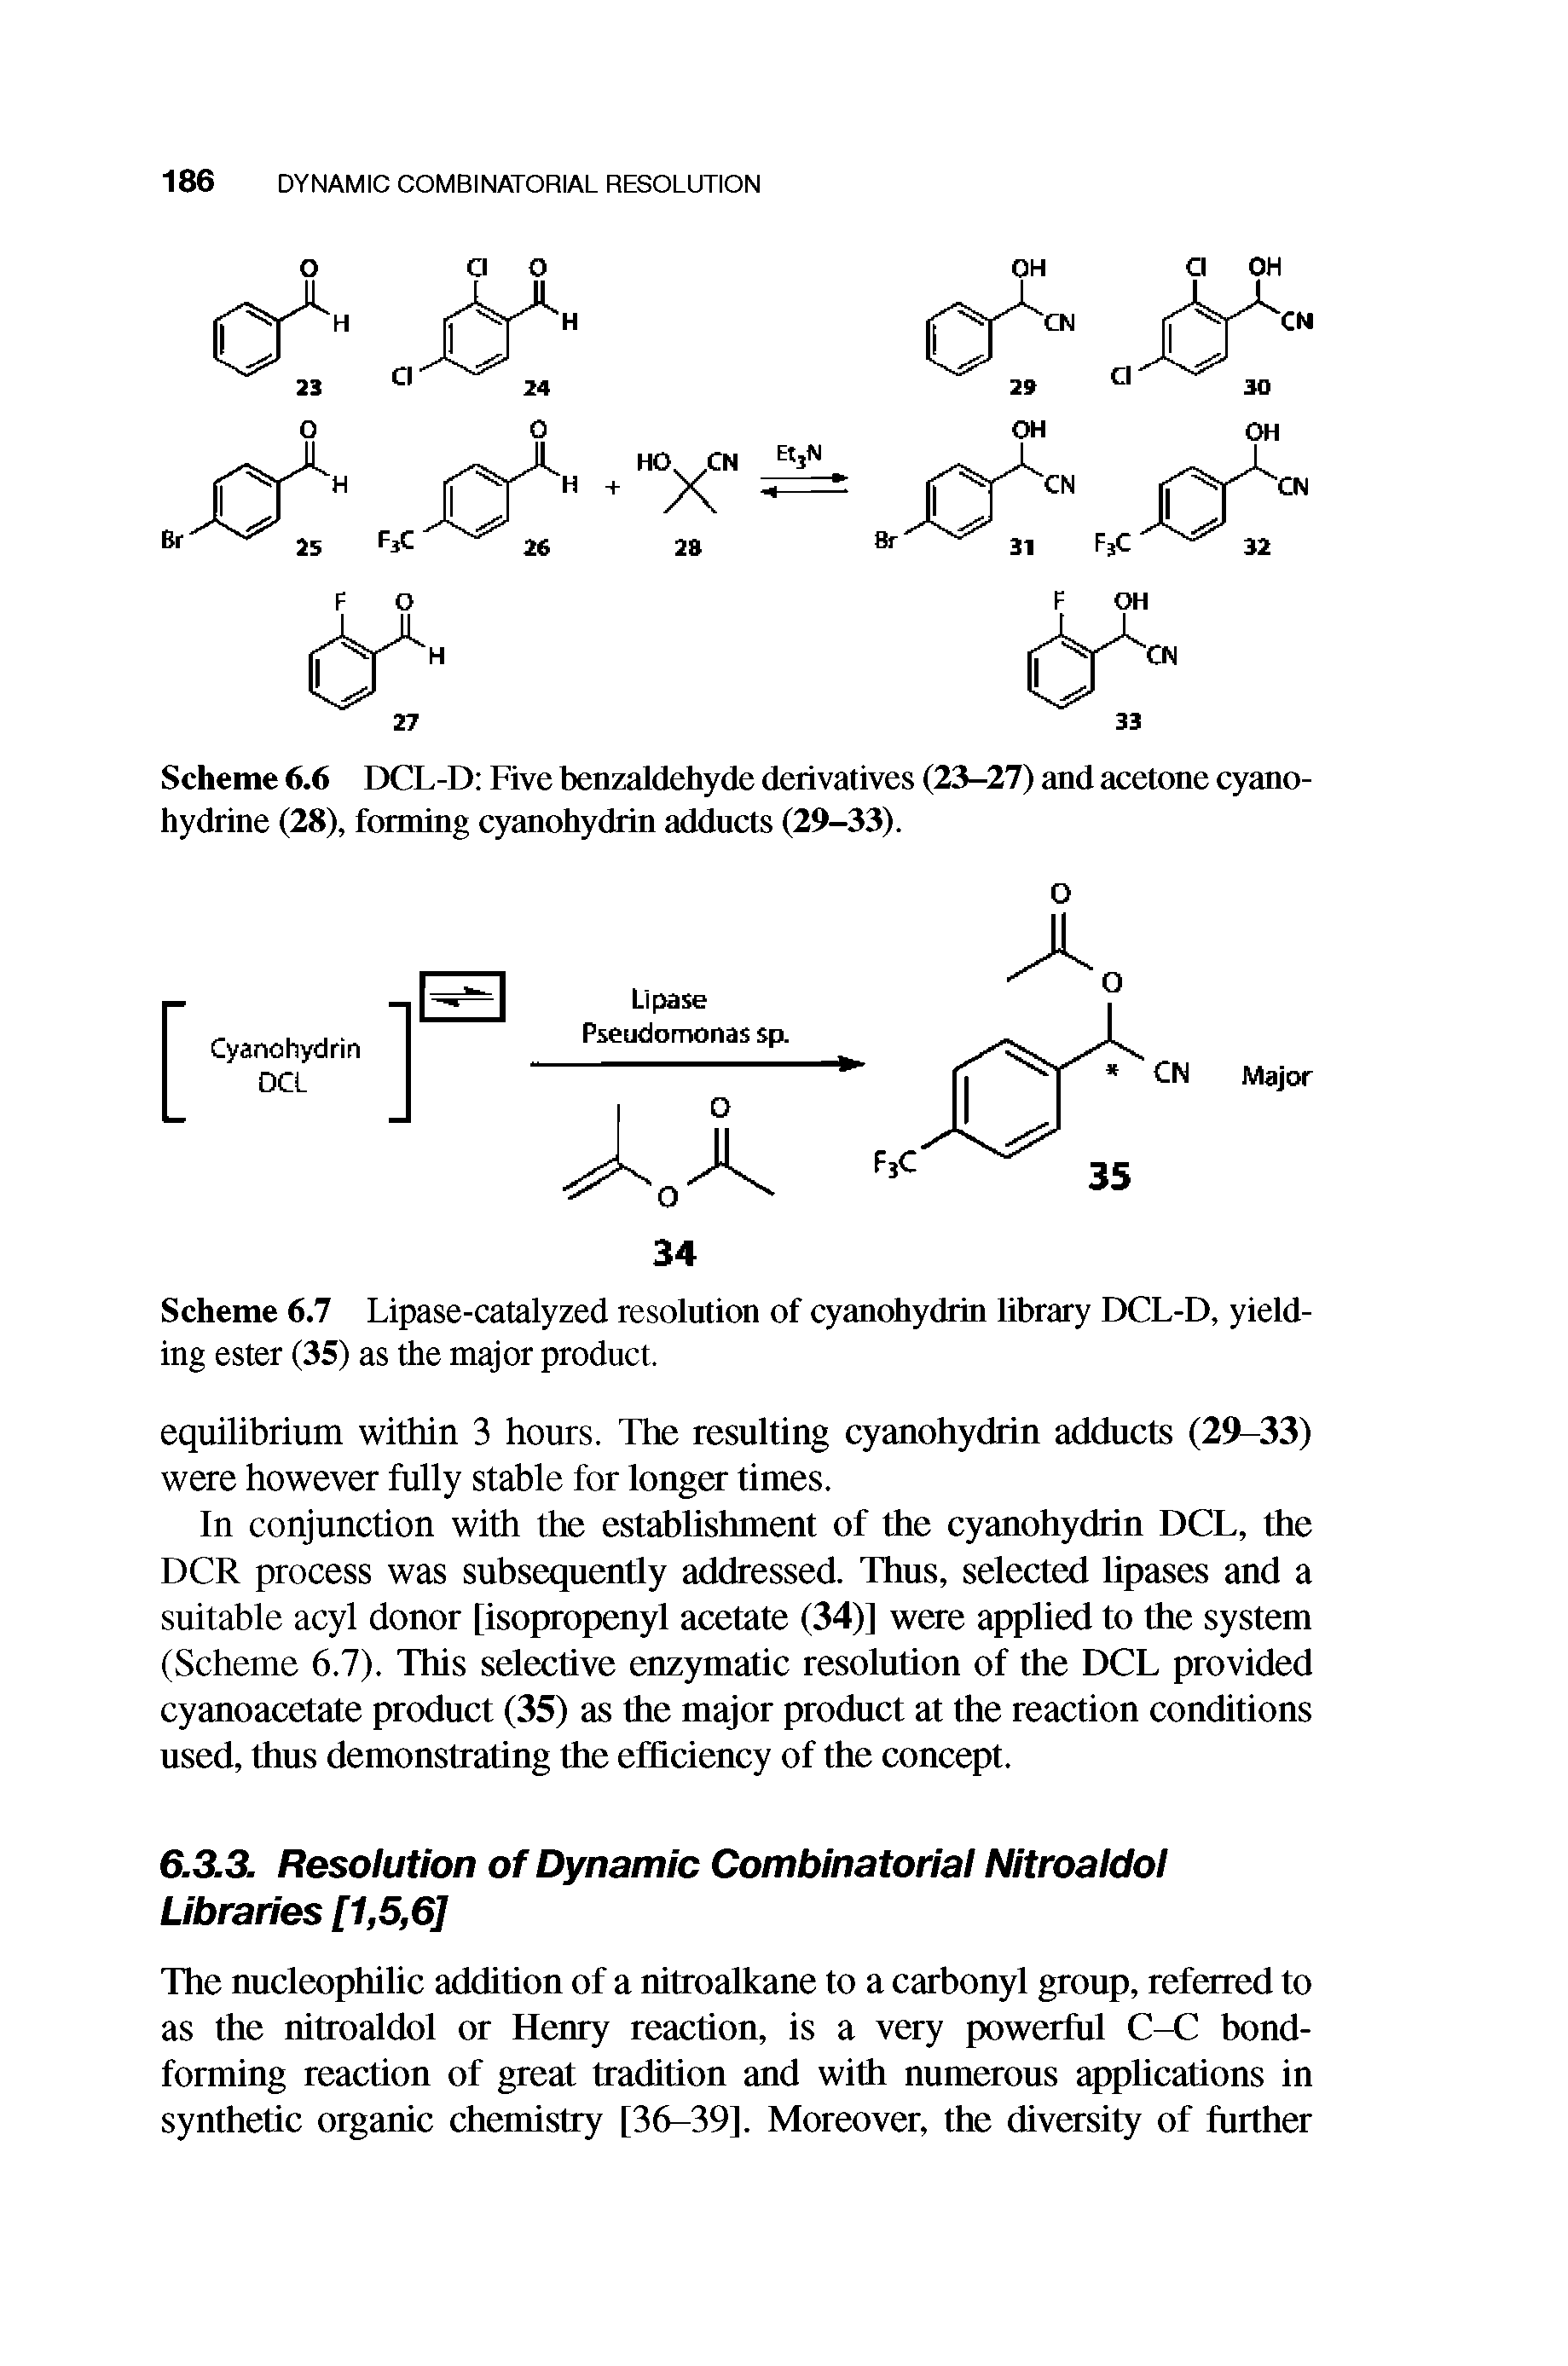 Scheme 6.6 DCL-D Five benzaldehyde derivatives (23-27) and acetone cyano-hydrine (28), forming cyanohydrin adducts (29-33).